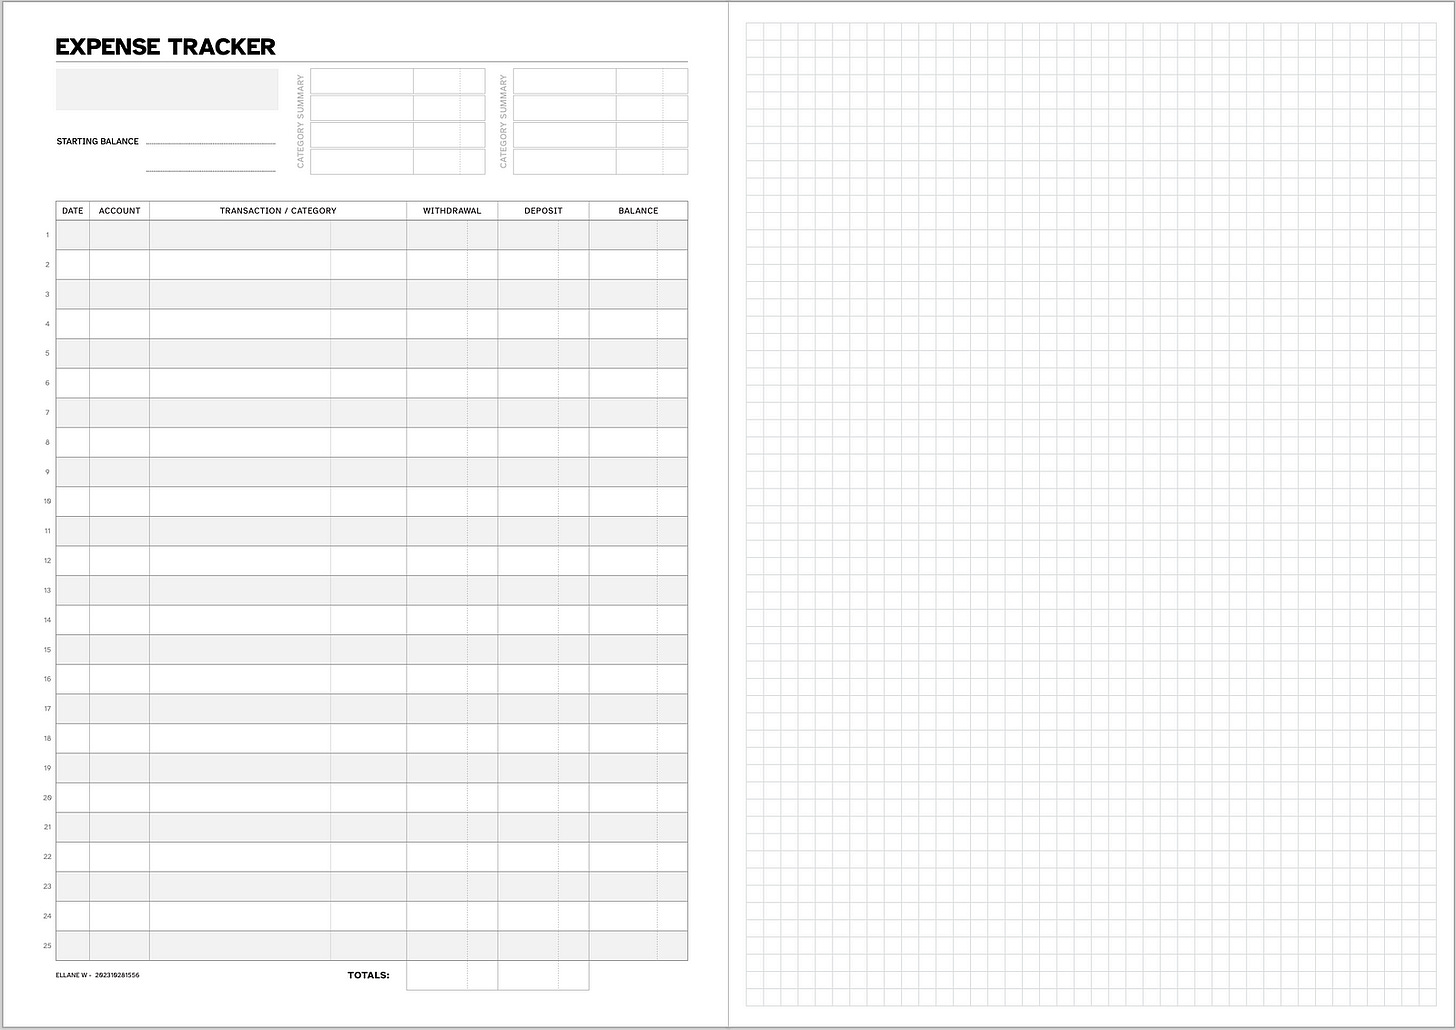 Two pages side by side, black printing on white paper. On the right is a simple grey grid, like regular graph paper. On the right is a table with 28 lines and 7 columns: Date, Account, Transaction, Category, Withdrawal, Deposit, Balance. The heading at the top left of the page reads EXPENSE TRACKER. There’s space to write the month and year under that. On the top right of the page are two small grids for recording category totals.